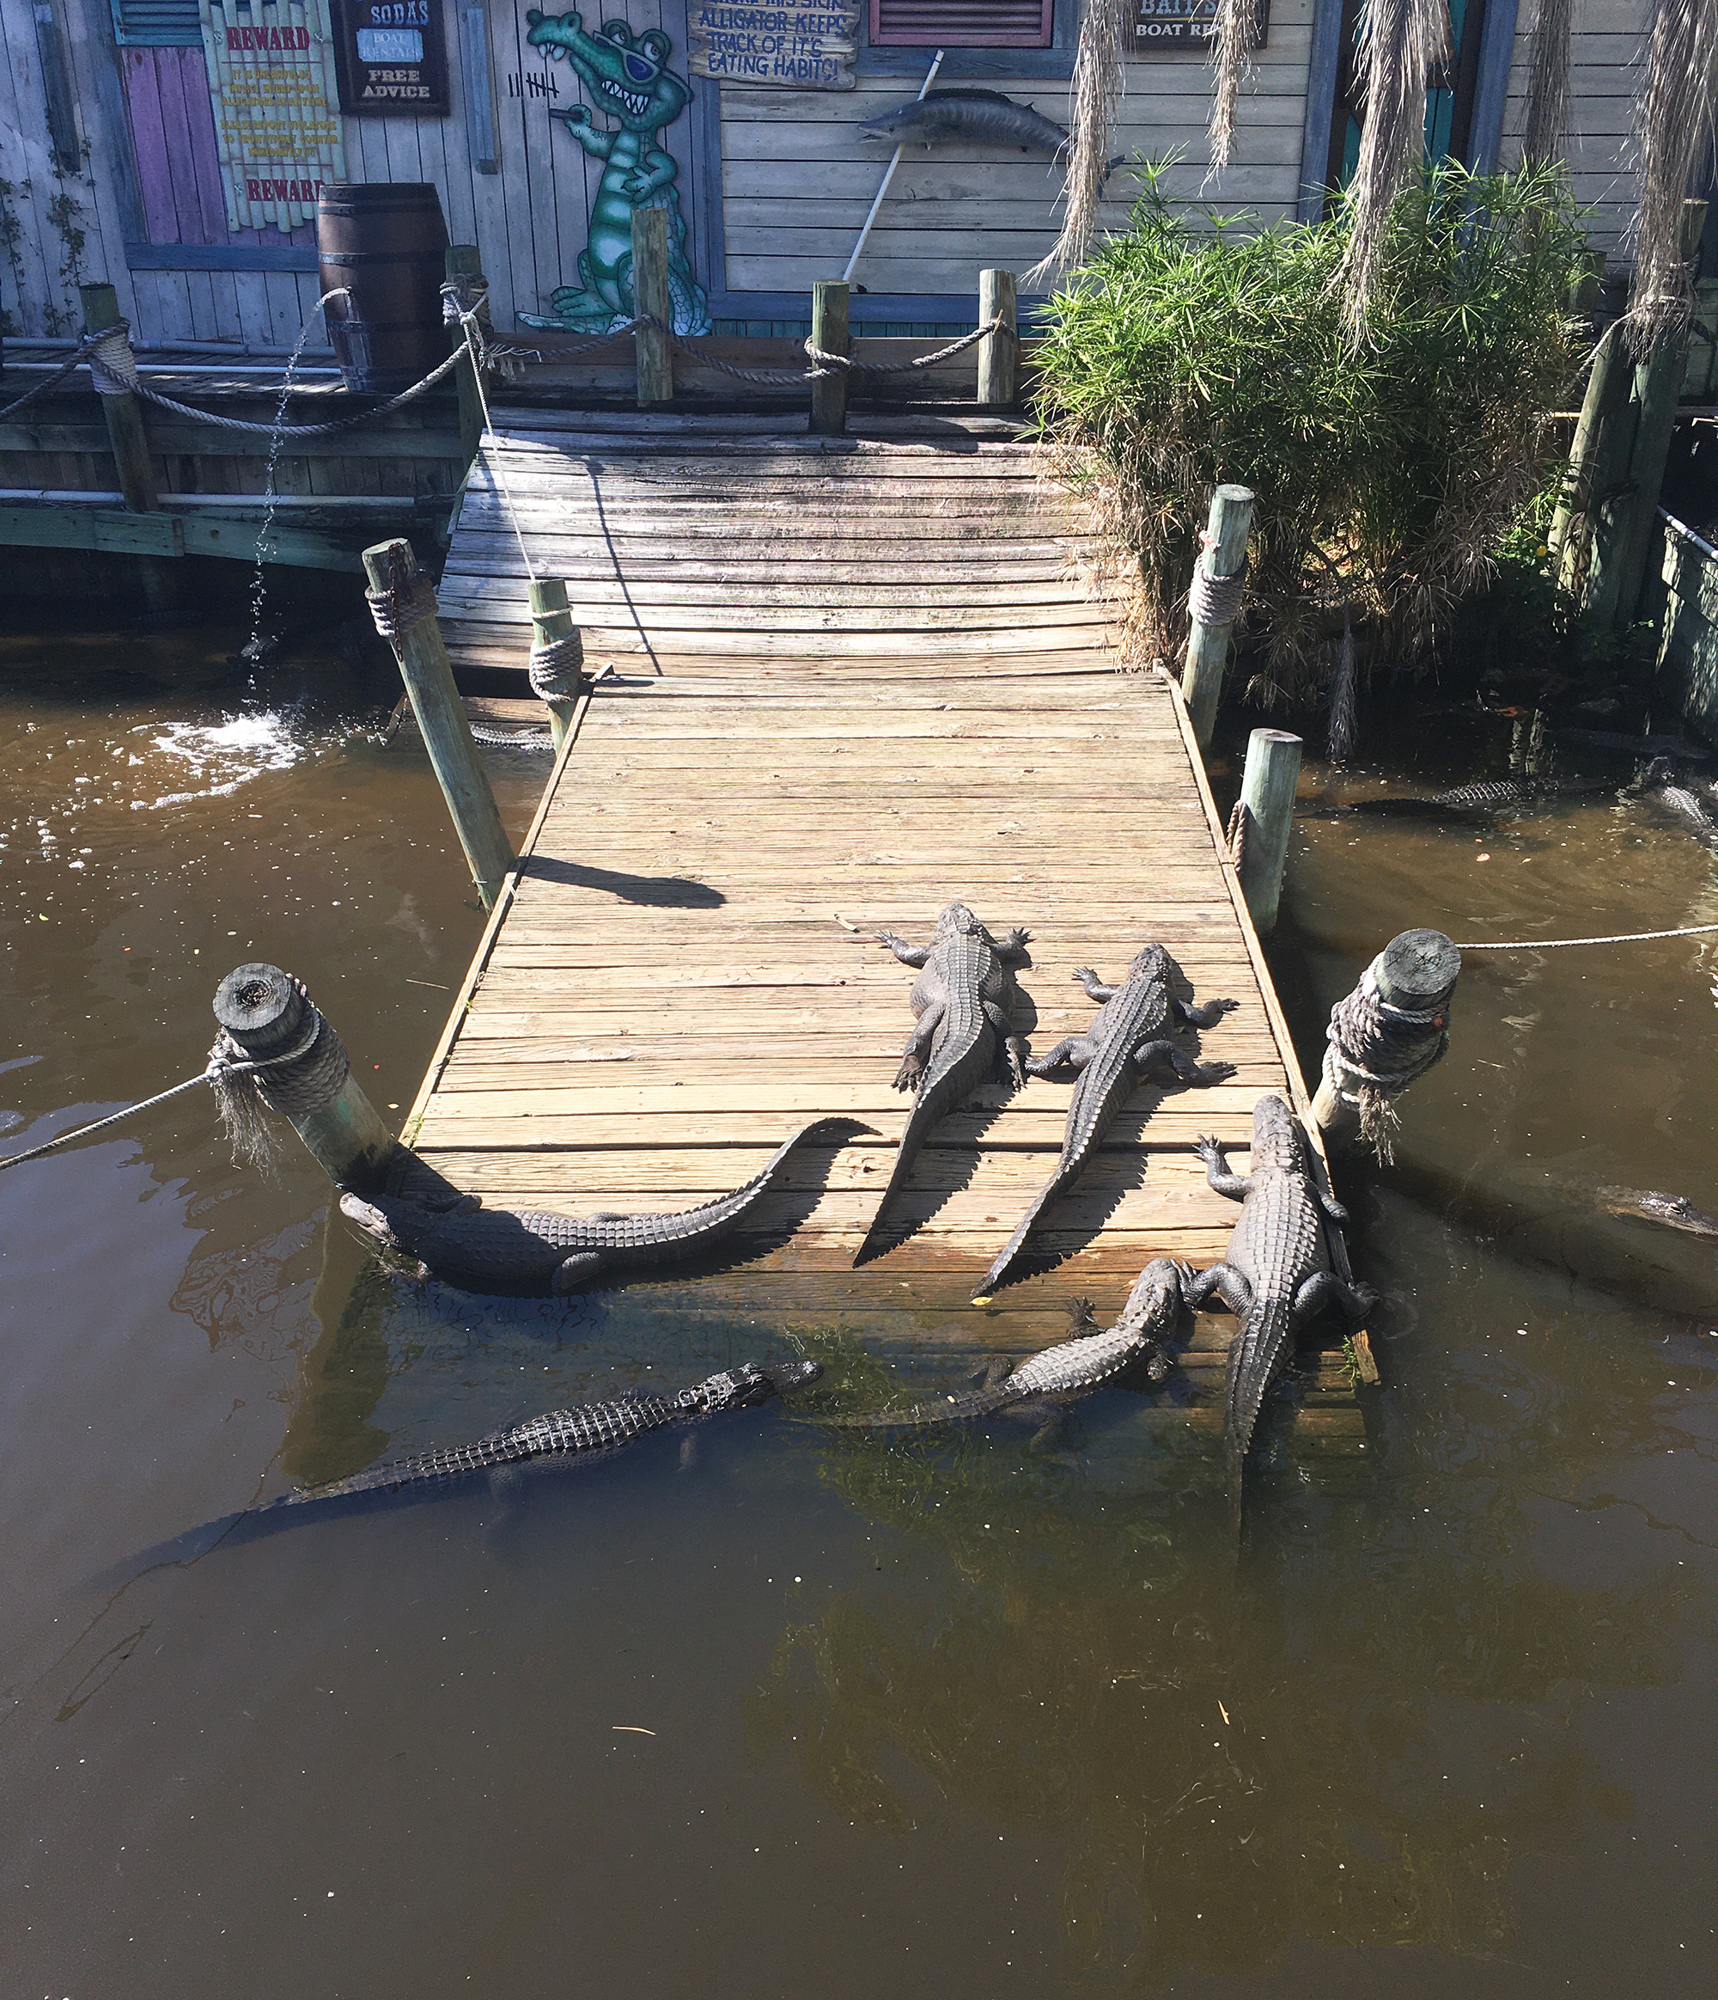 When Adventure Landing closes, the 22 alligators that swim in the moat will be taken by Gator Encounter.